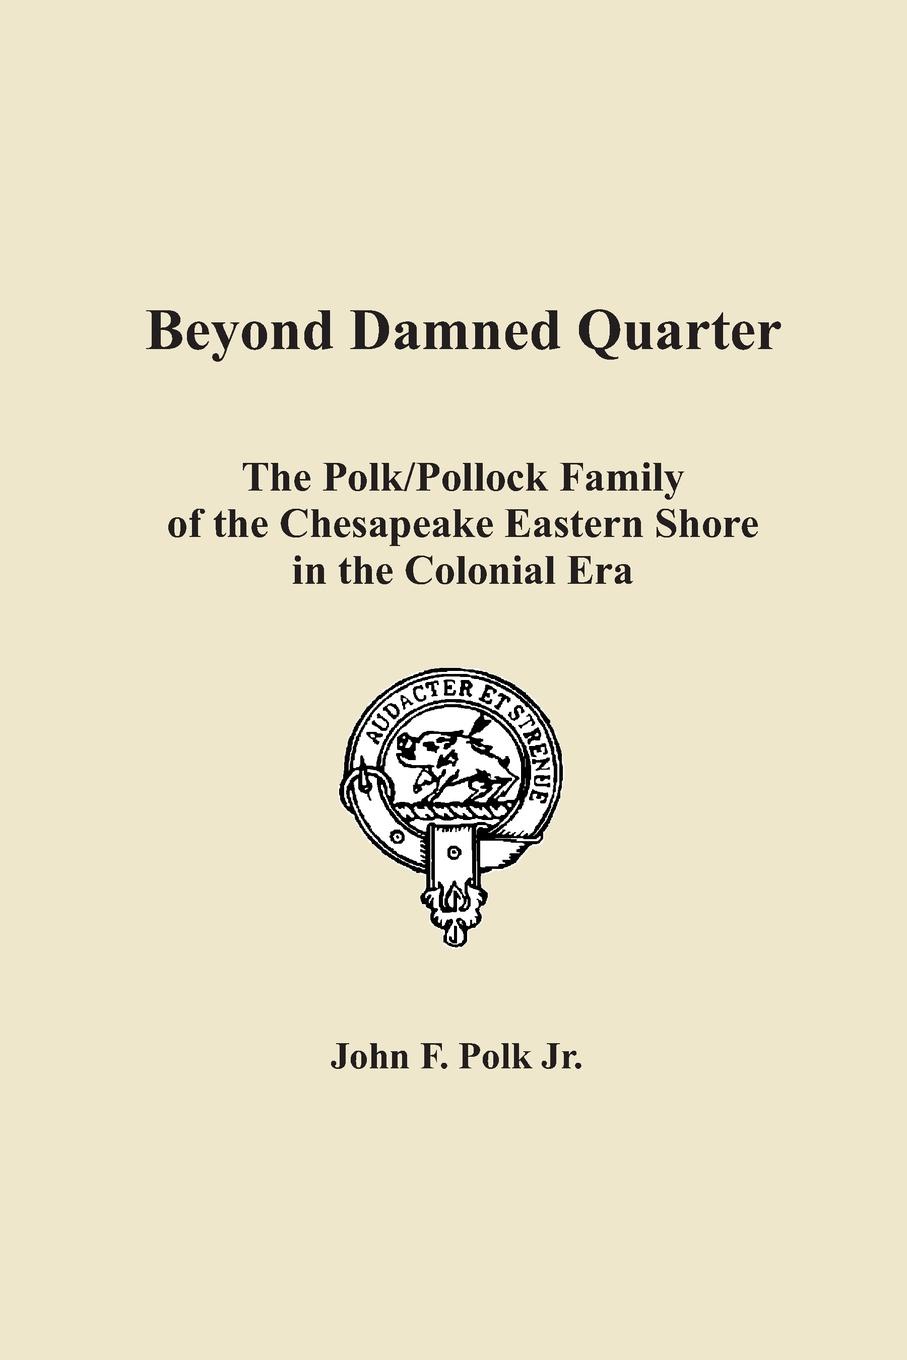 Beyond Damned Quarter. The Polk/Pollock Family of the Chesapeake Eastern Shore in the Colonial Era